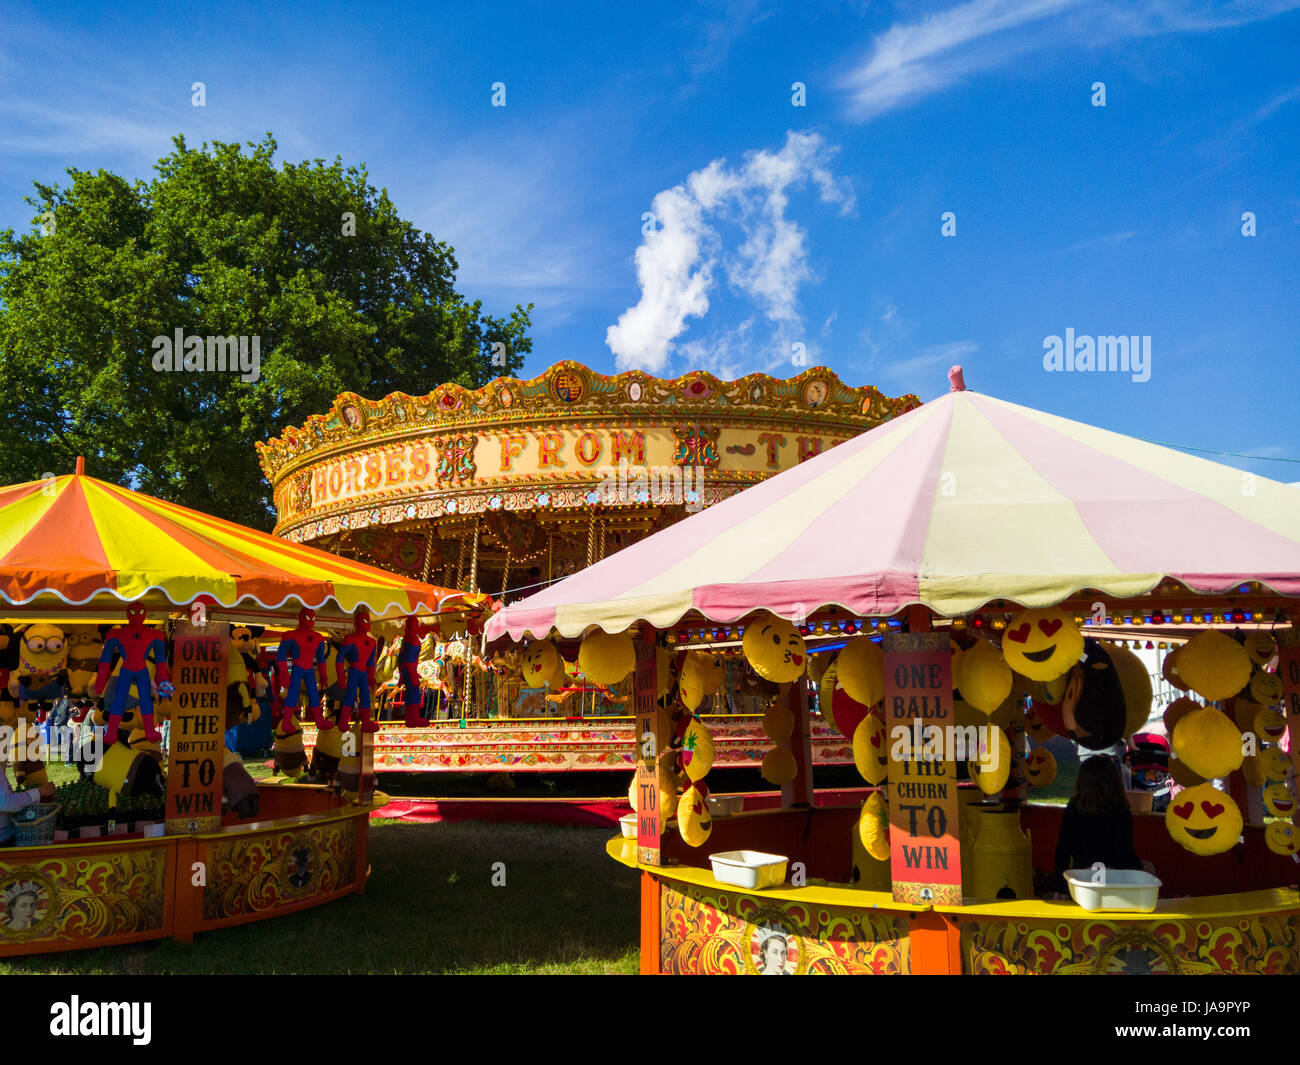 Game stalls and a merry go round at the funfair at the Bath and West Show, Shepton Mallet, Somerset, England. Stock Photo